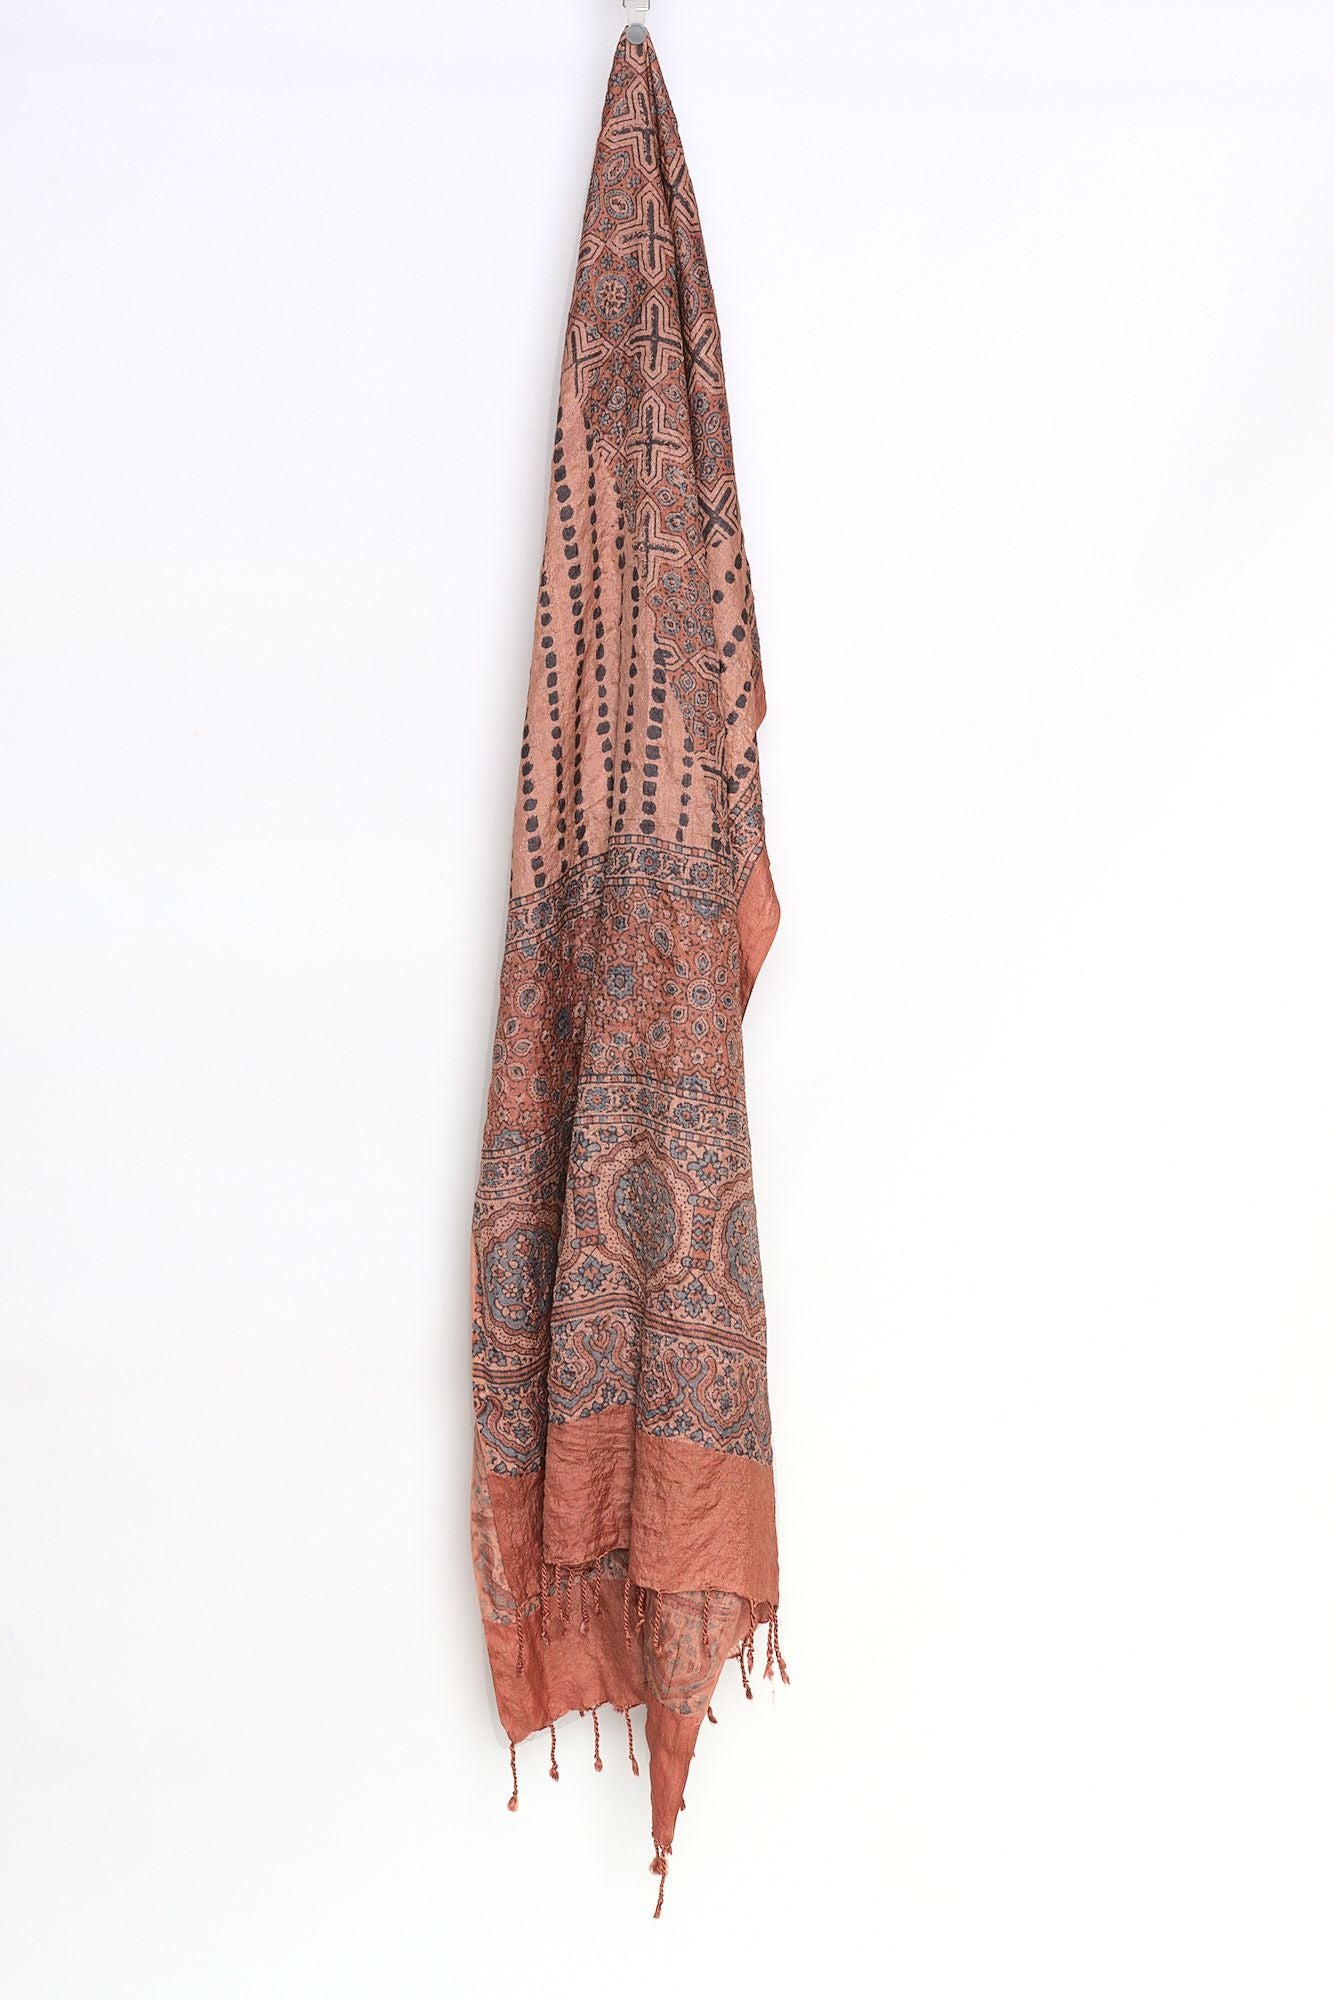 
                  
                    Madder root wild silk natural dye scarf-Gifts, Scarves-xo
                  
                